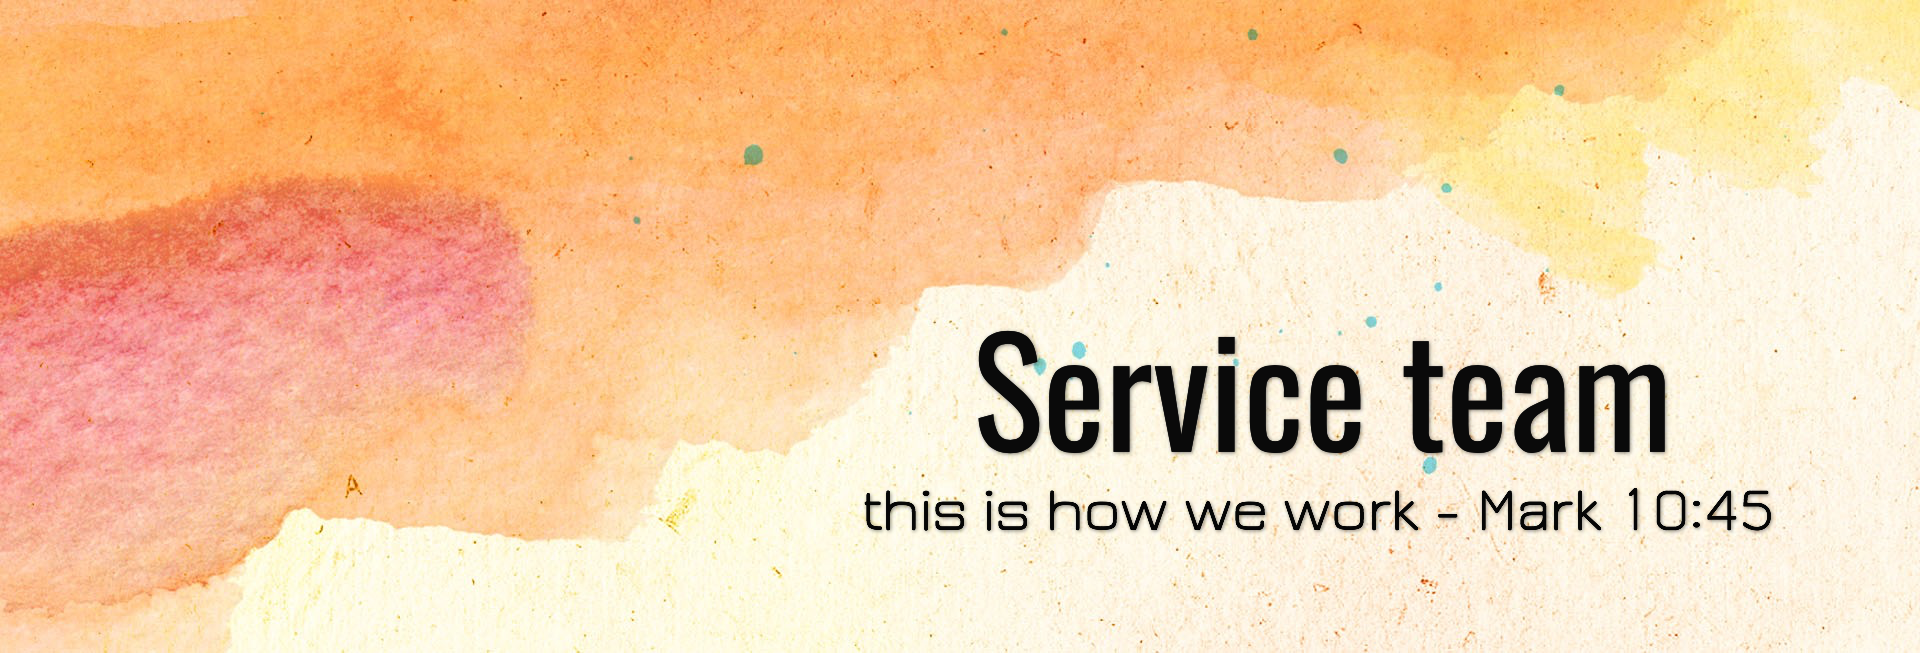 Act Justly Church Website Banner